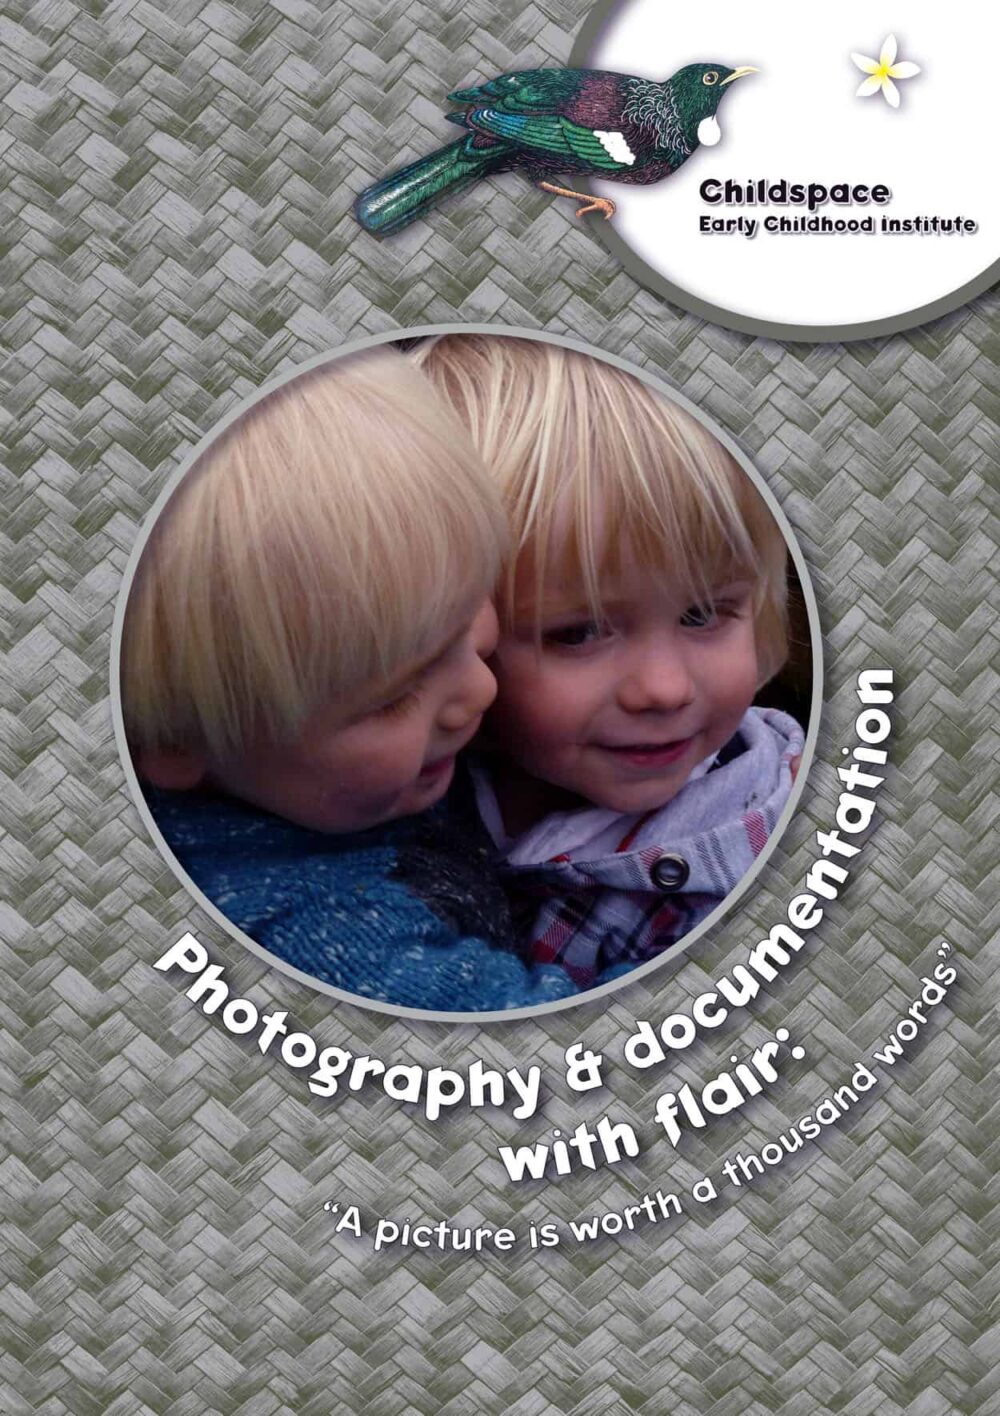 Photography and documentation with flair